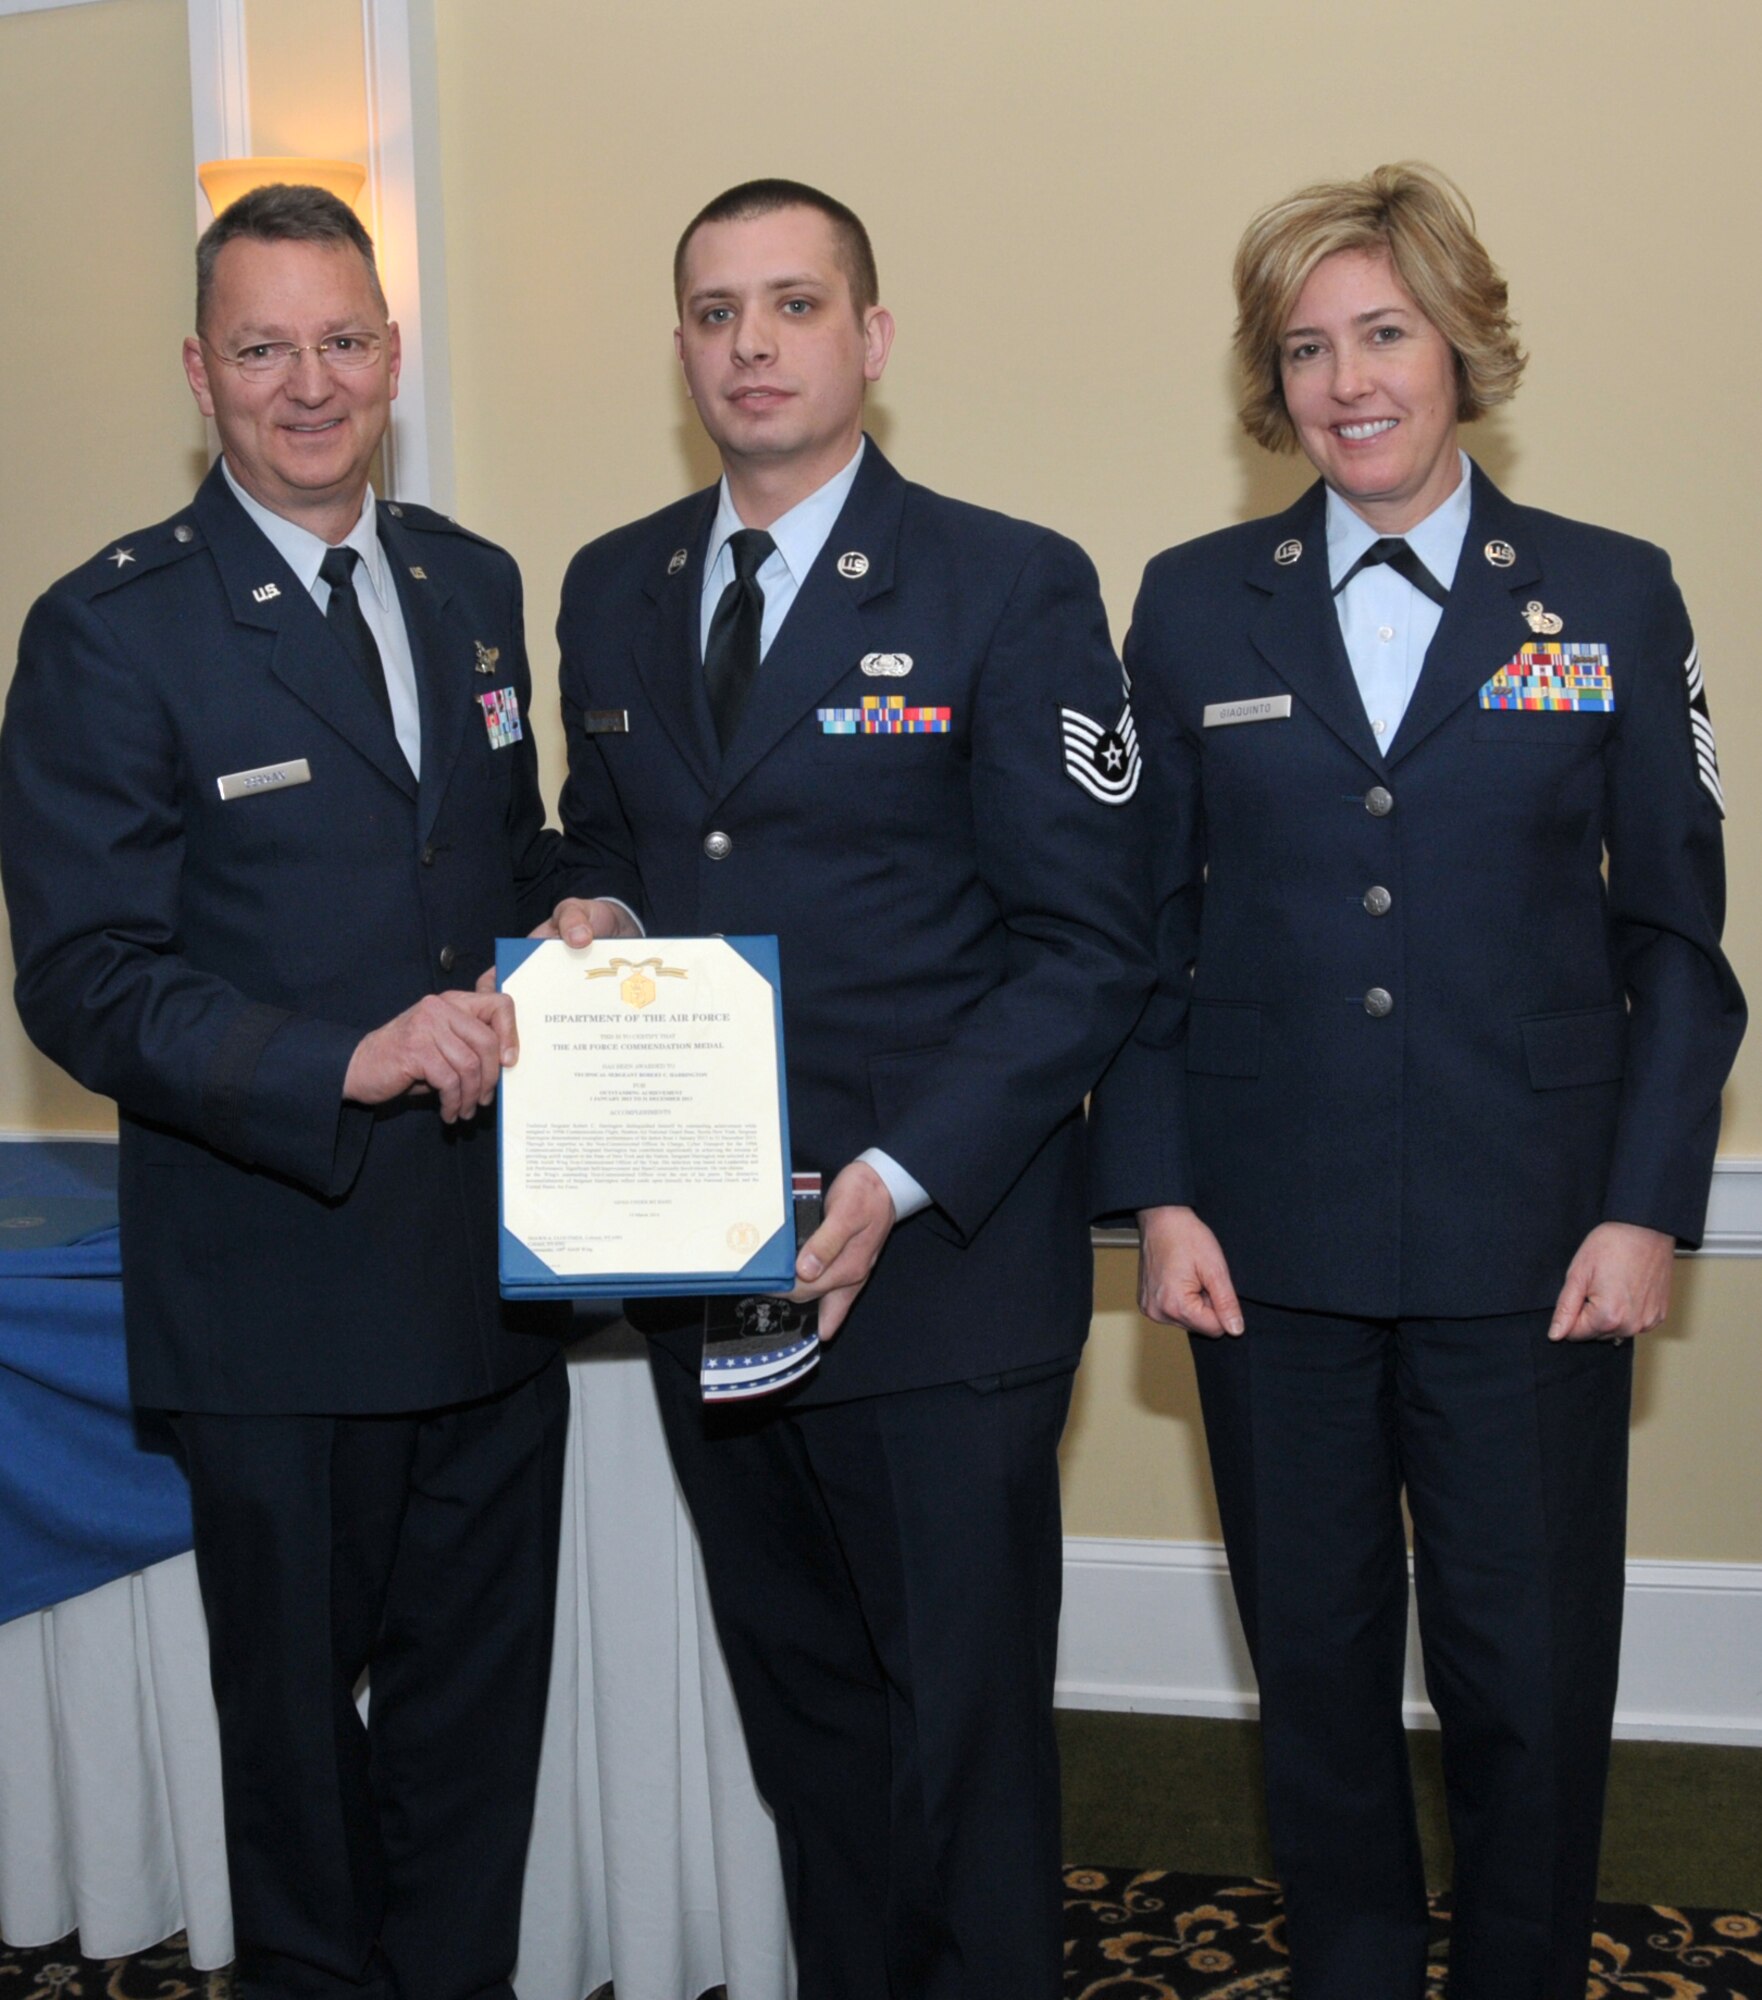 SCOTIA, N.Y. -- Tech. Sgt. Robert Harrington, center, was named the 109th Airlift Wing's NCO of the Year. He was honored during the annual Airman of the Year Dinner on April 5. Also pictured are Brig. Gen. Anthony German, New York's Chief of Staff-Air, and Chief Master Sgt. Amy Giaquinto, 109th AW command chief.  Harrington is assigned to the 109th Communications Flight. (Air National Guard photo by Master Sgt. William Gizara/Released)